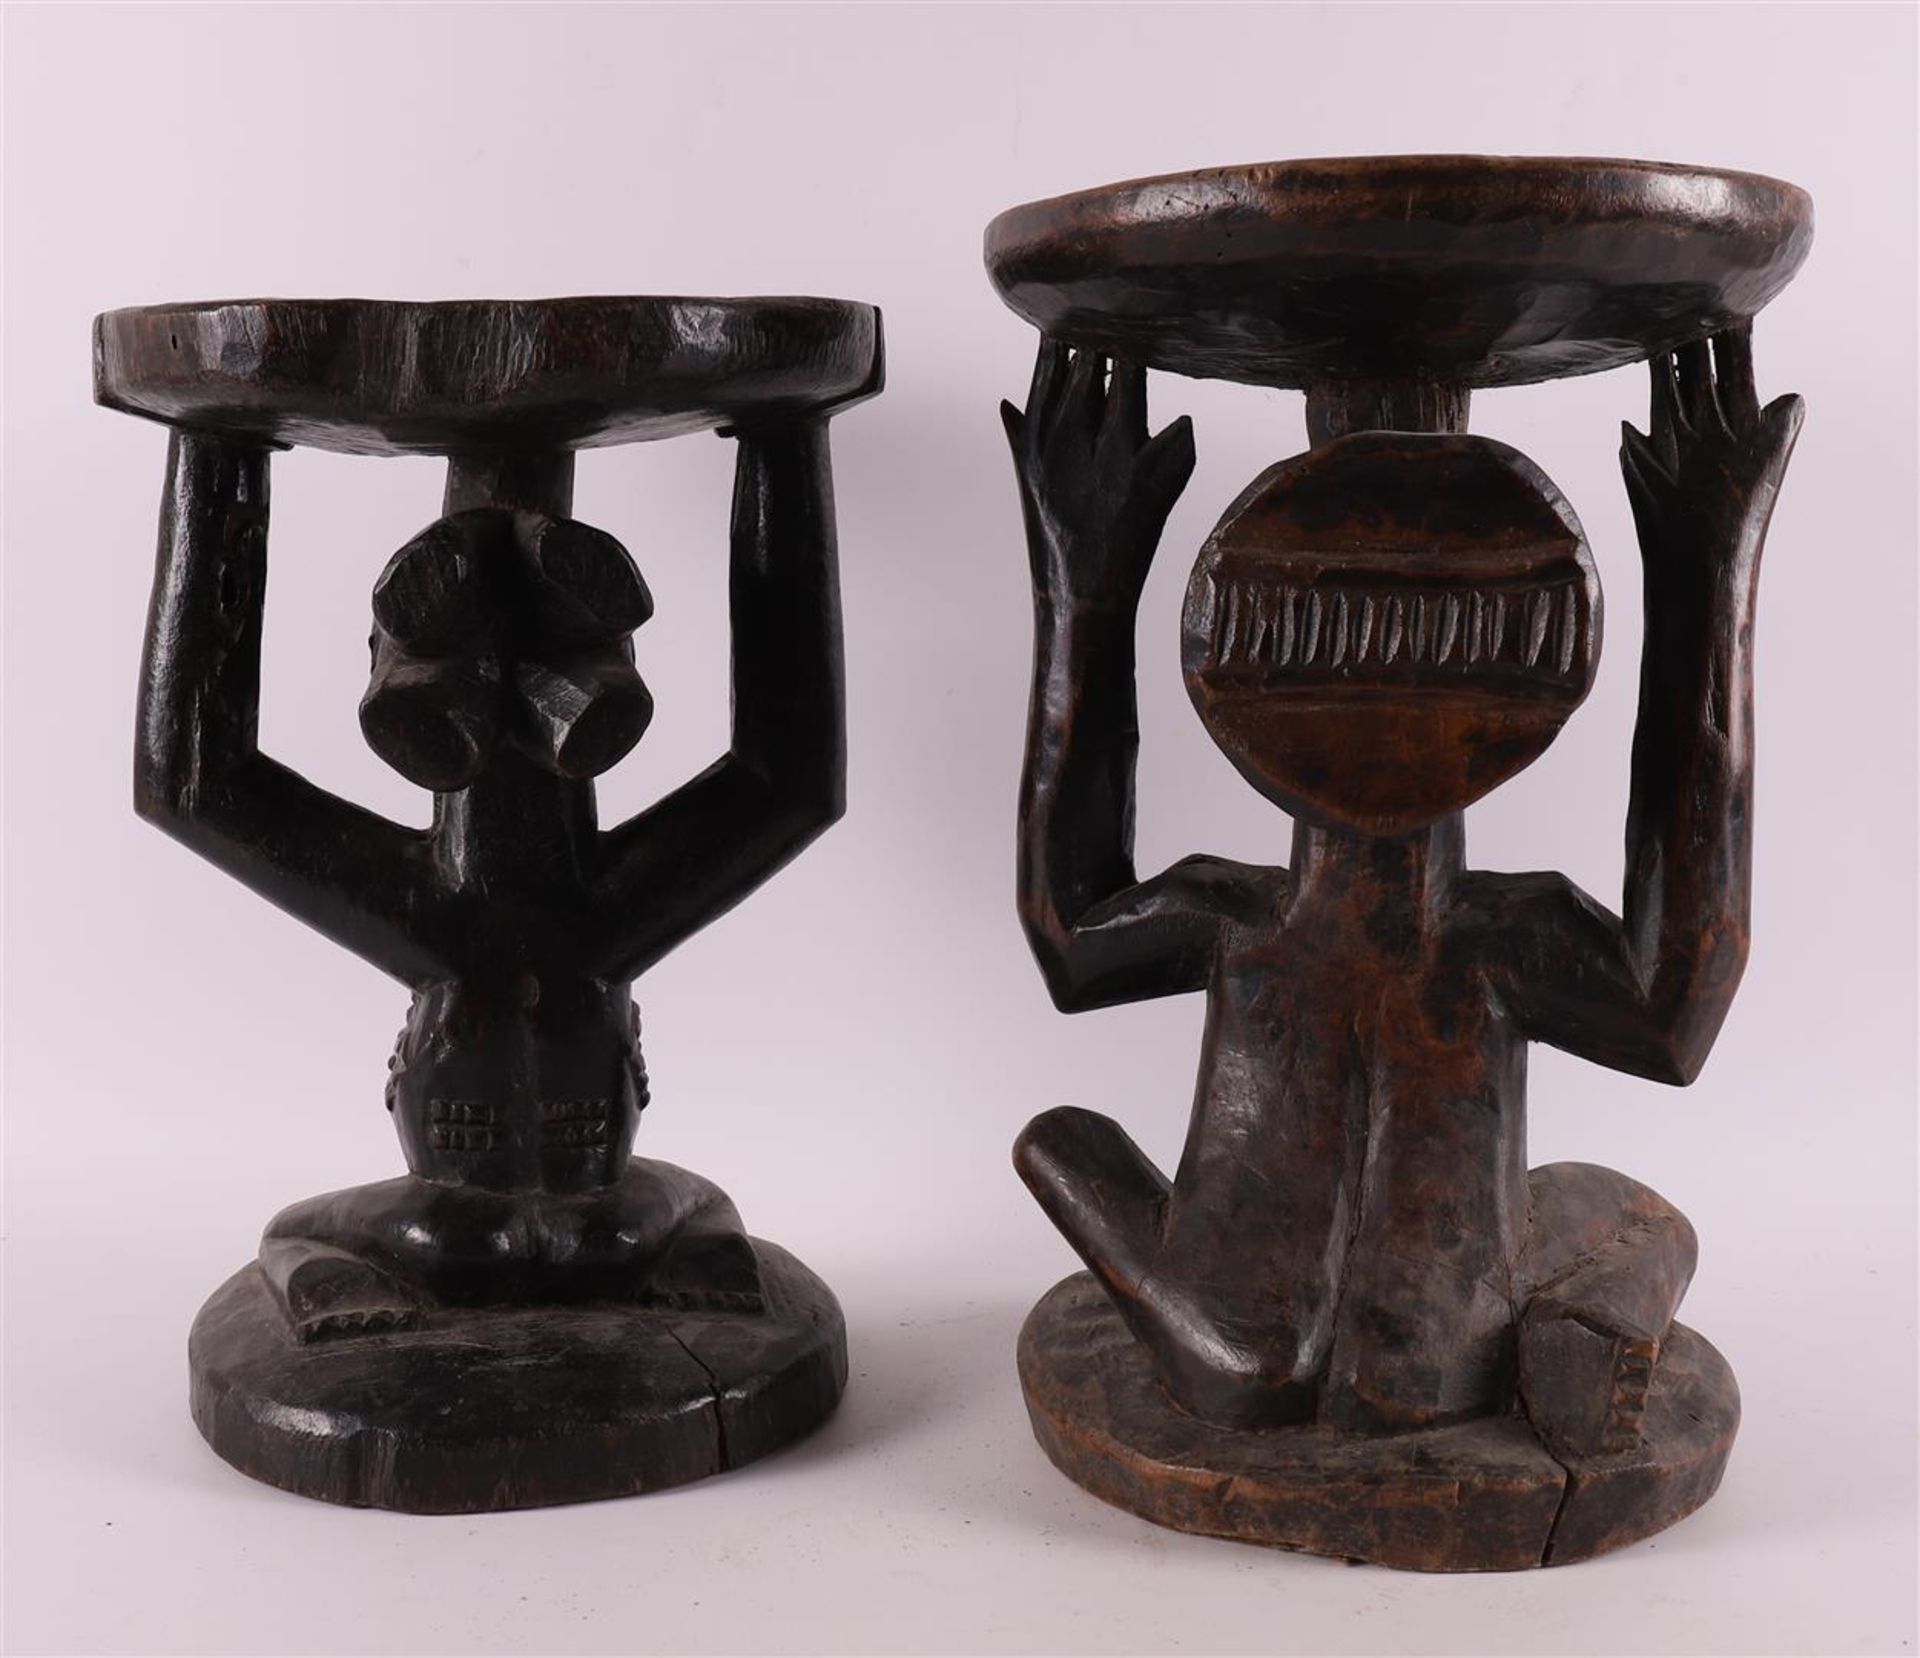 Two carved wooden stools, Luba, Congo, Central Africa, 20th century - Image 3 of 5